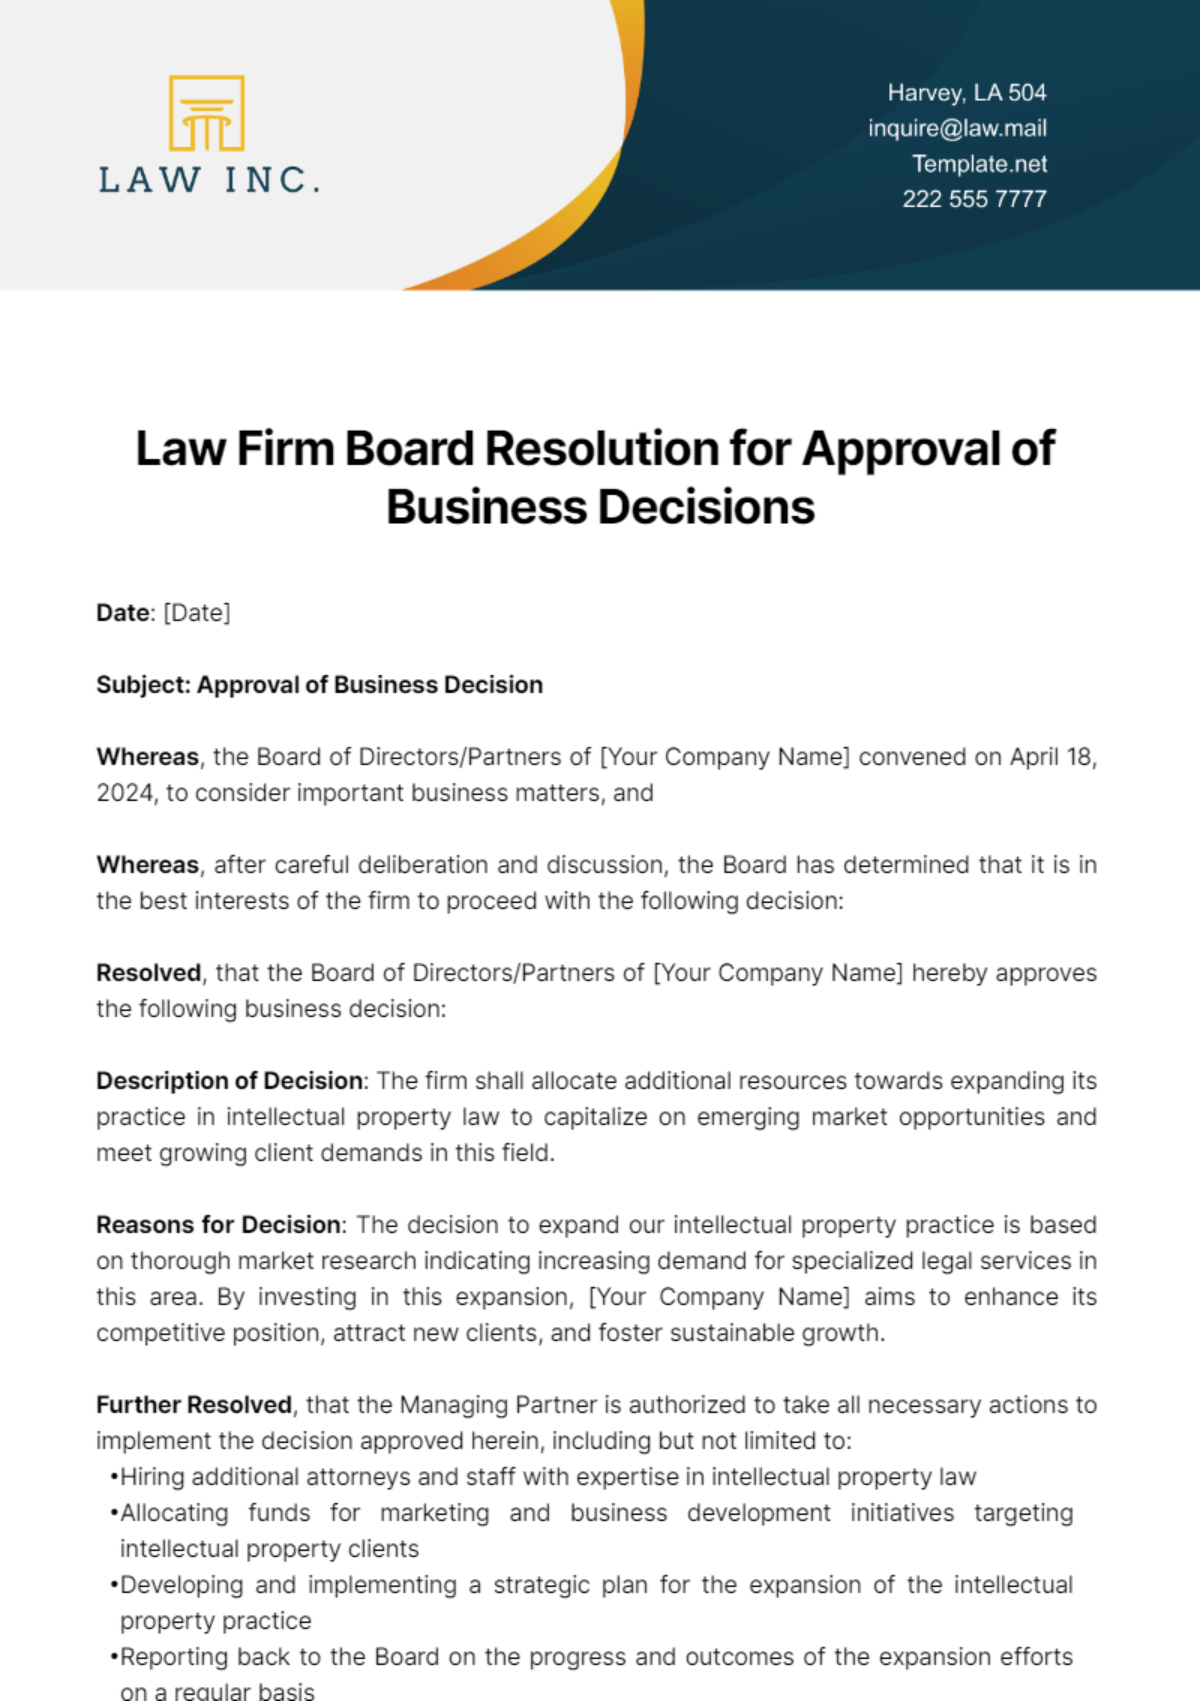 Law Firm Board Resolution for Approval of Business Decisions Template